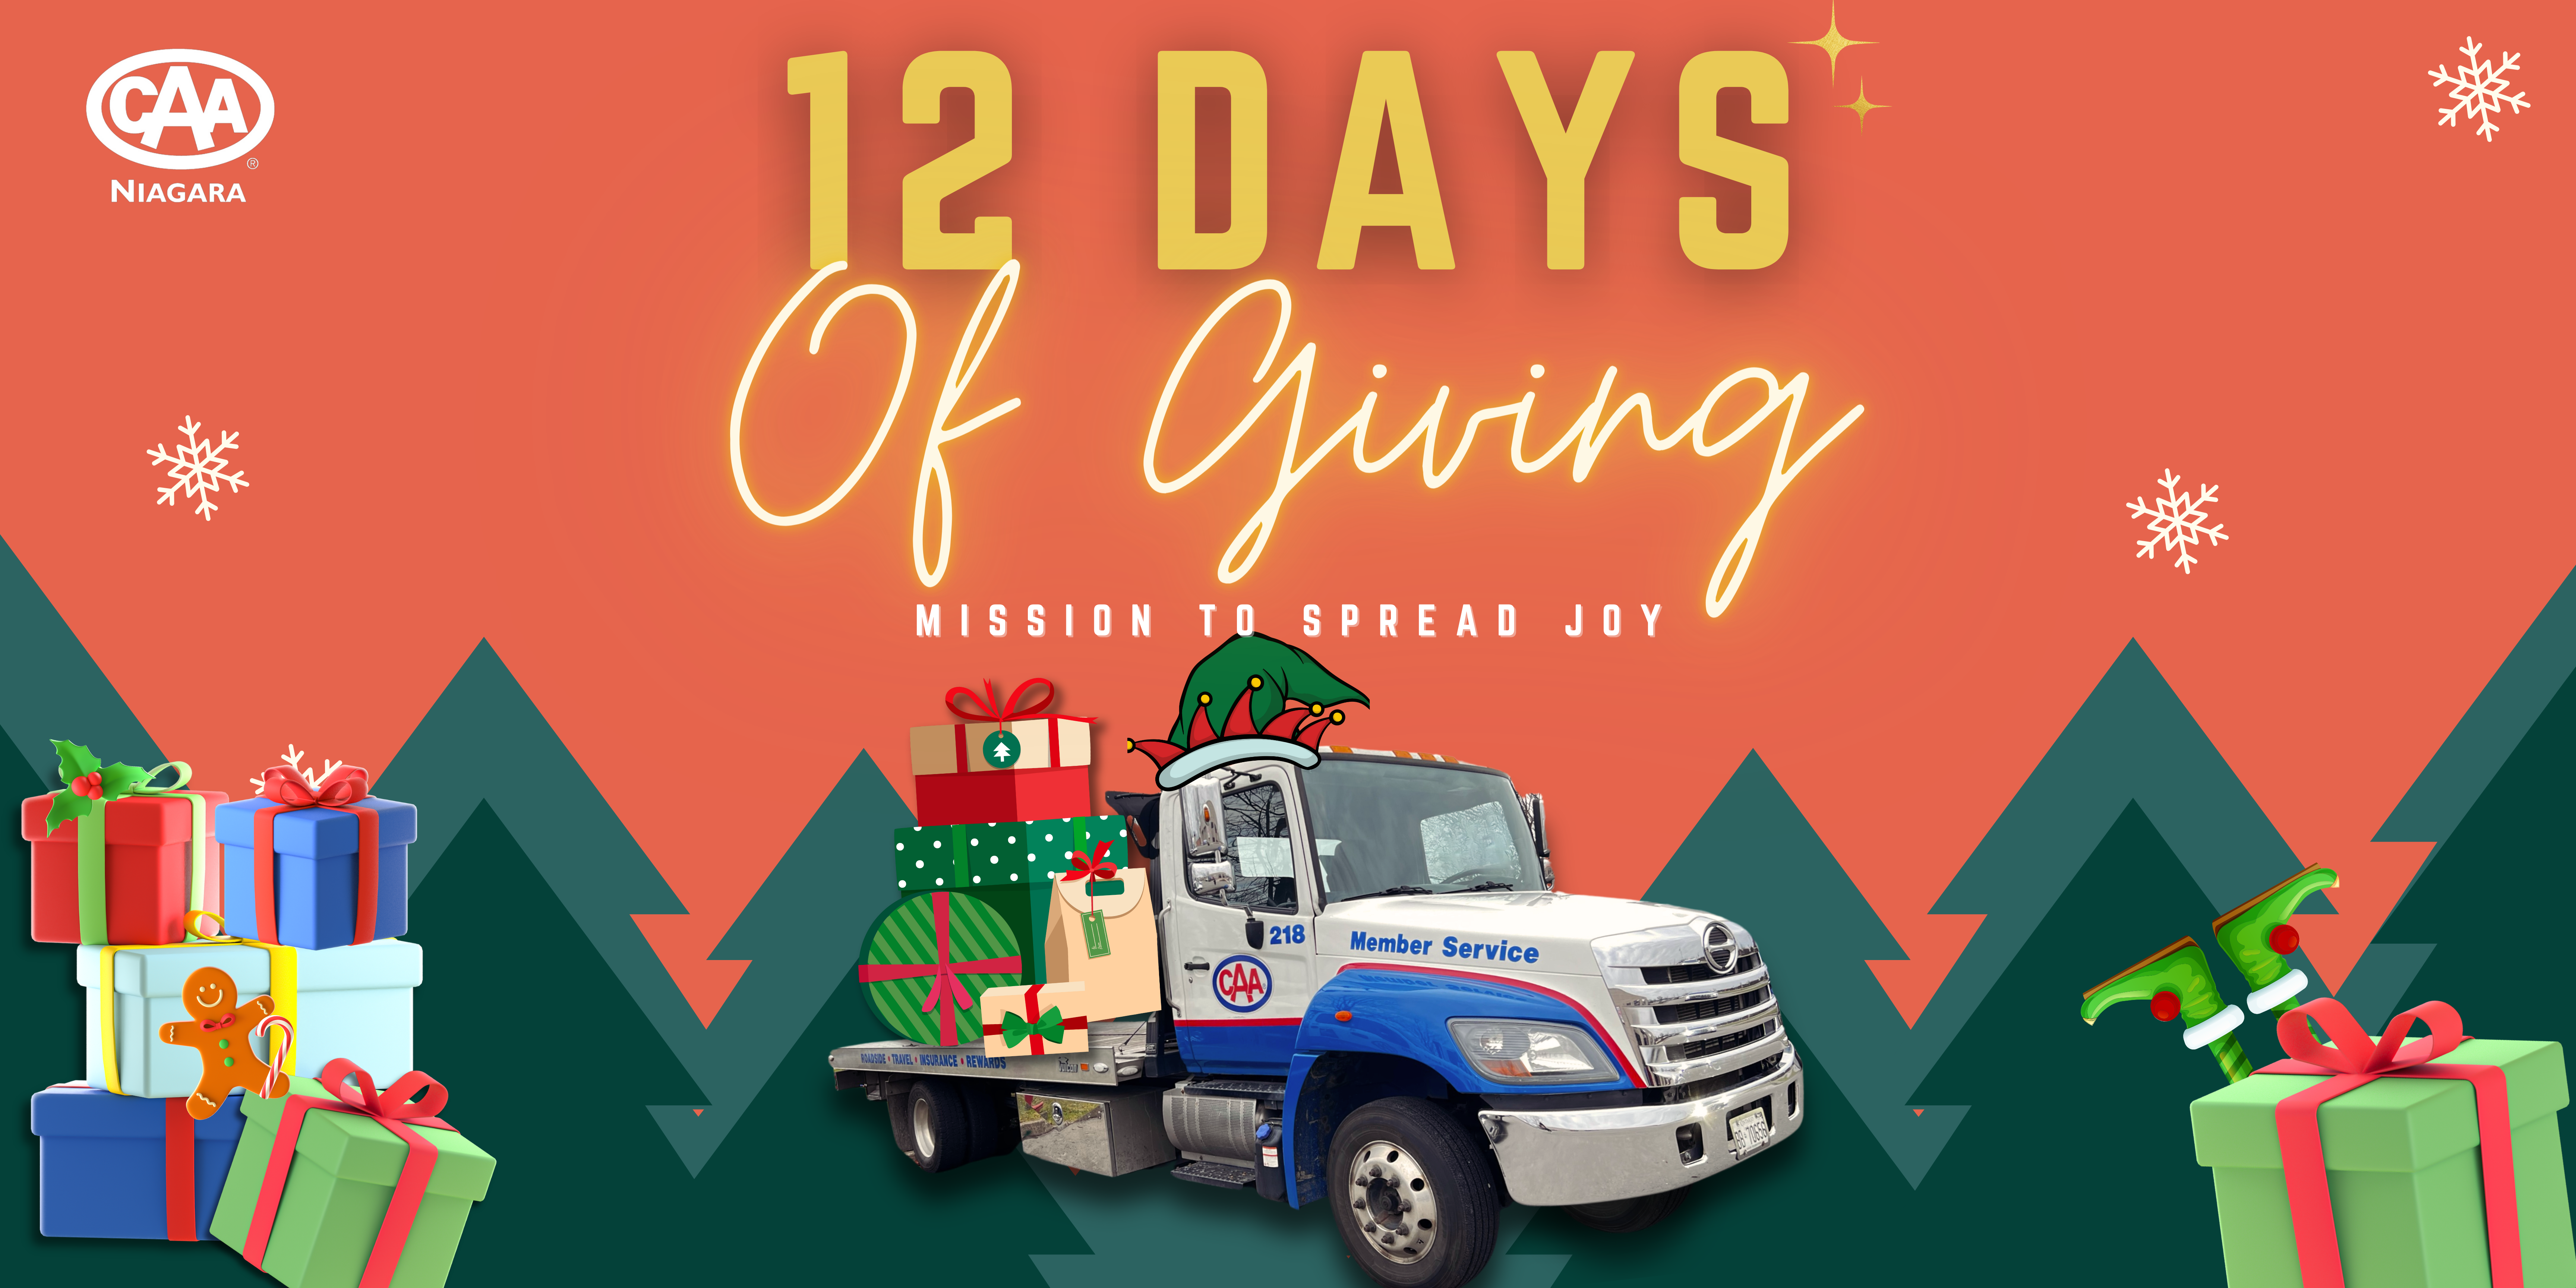 "12 Days of Giving. Mission to spread joy." is written above a CAA Tow Truck covered with presents